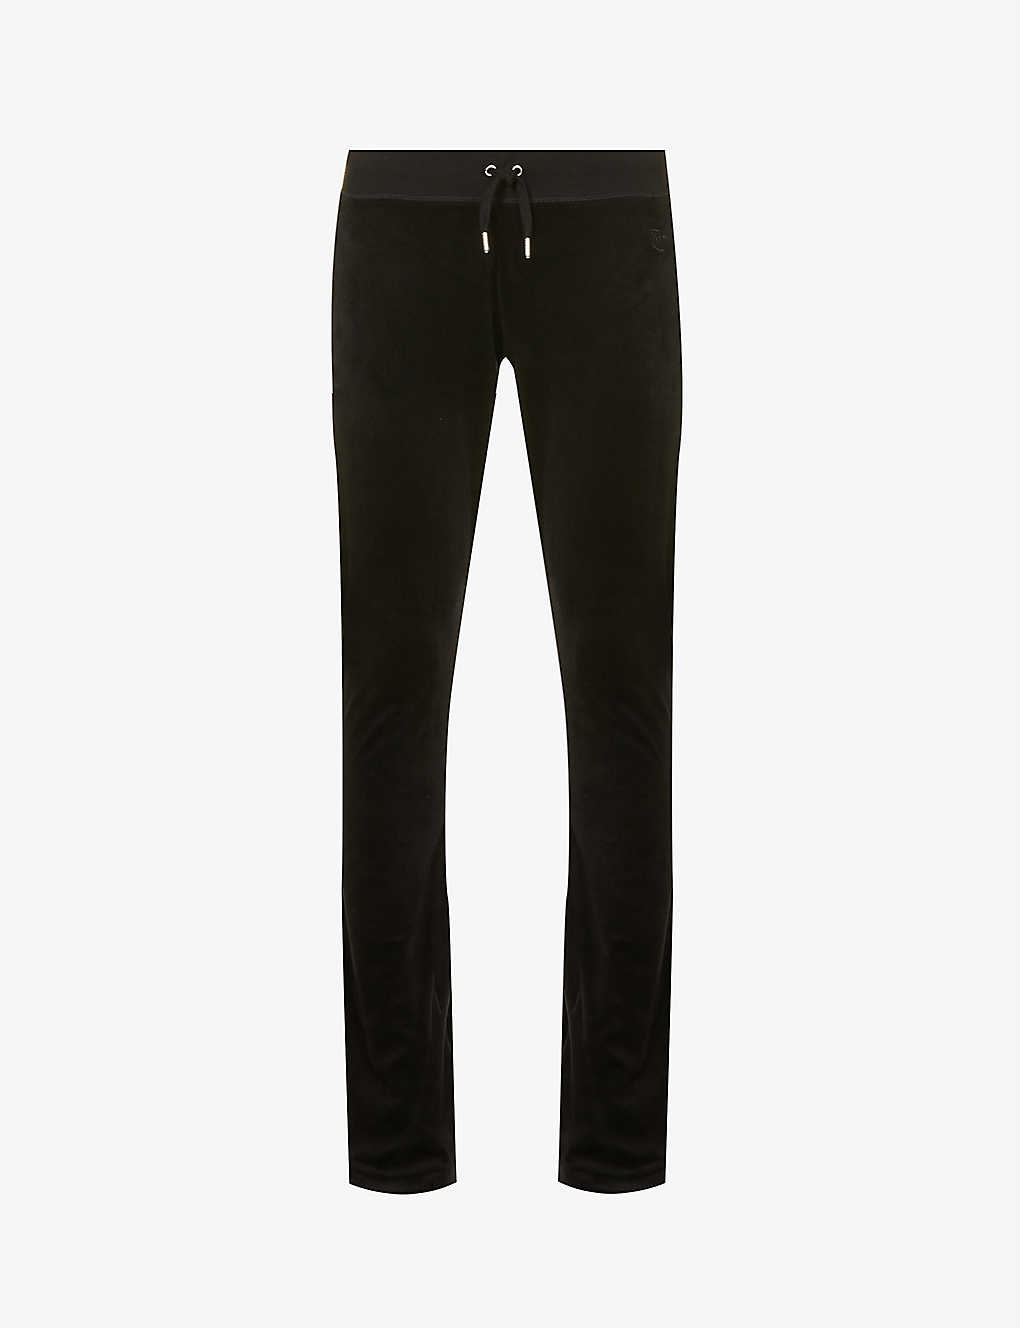 Juicy Couture Brand-embroidered Velour Jogging Bottoms In Black